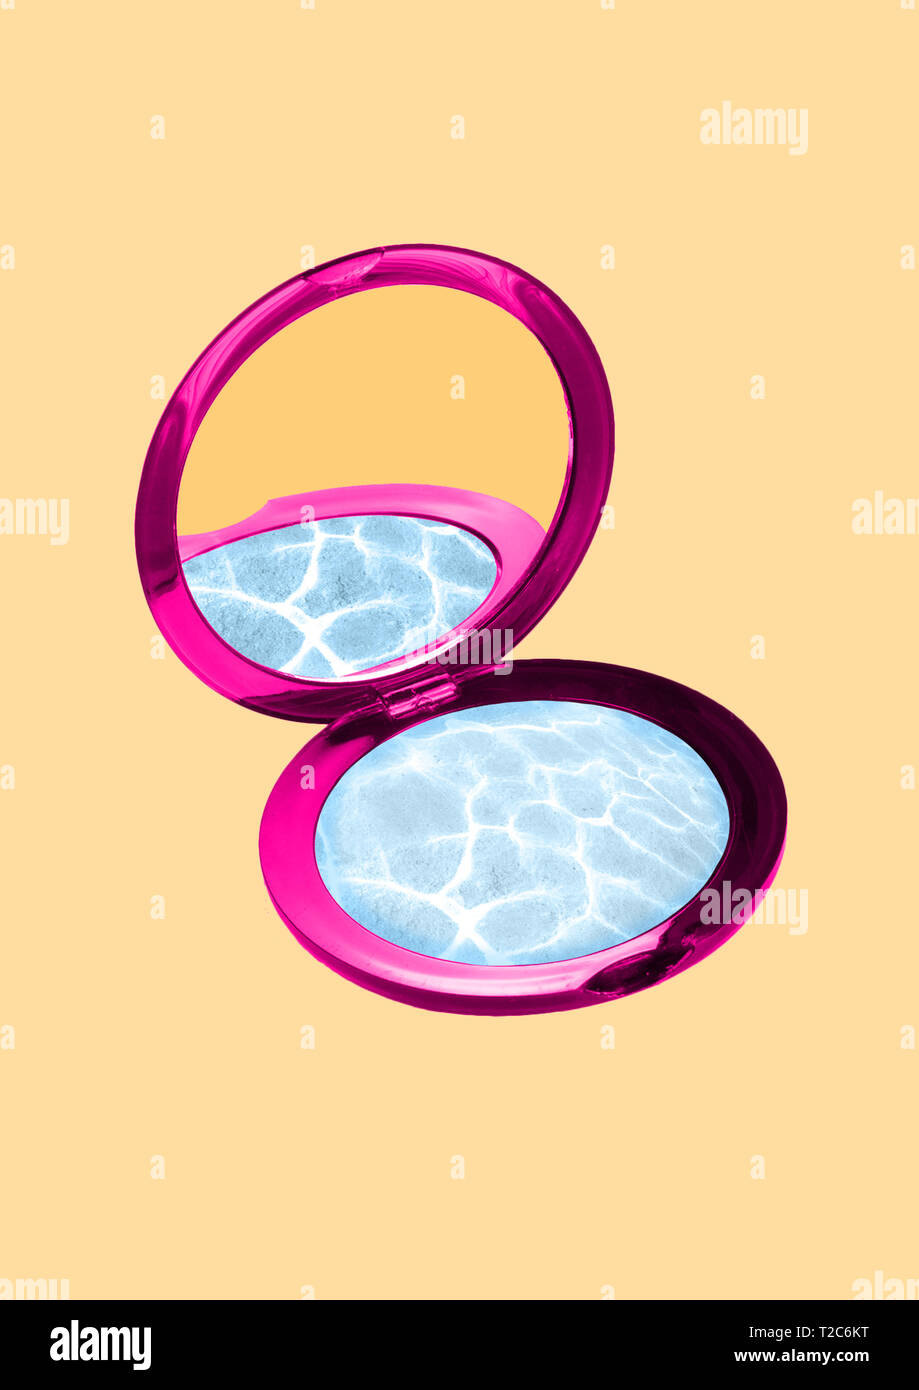 Reflection of reality. Dreams about resort or summer holidays. Sunny and beach mood. Pink cosmetic mirror filled with clean azure ocean or sea deep wa Stock Photo